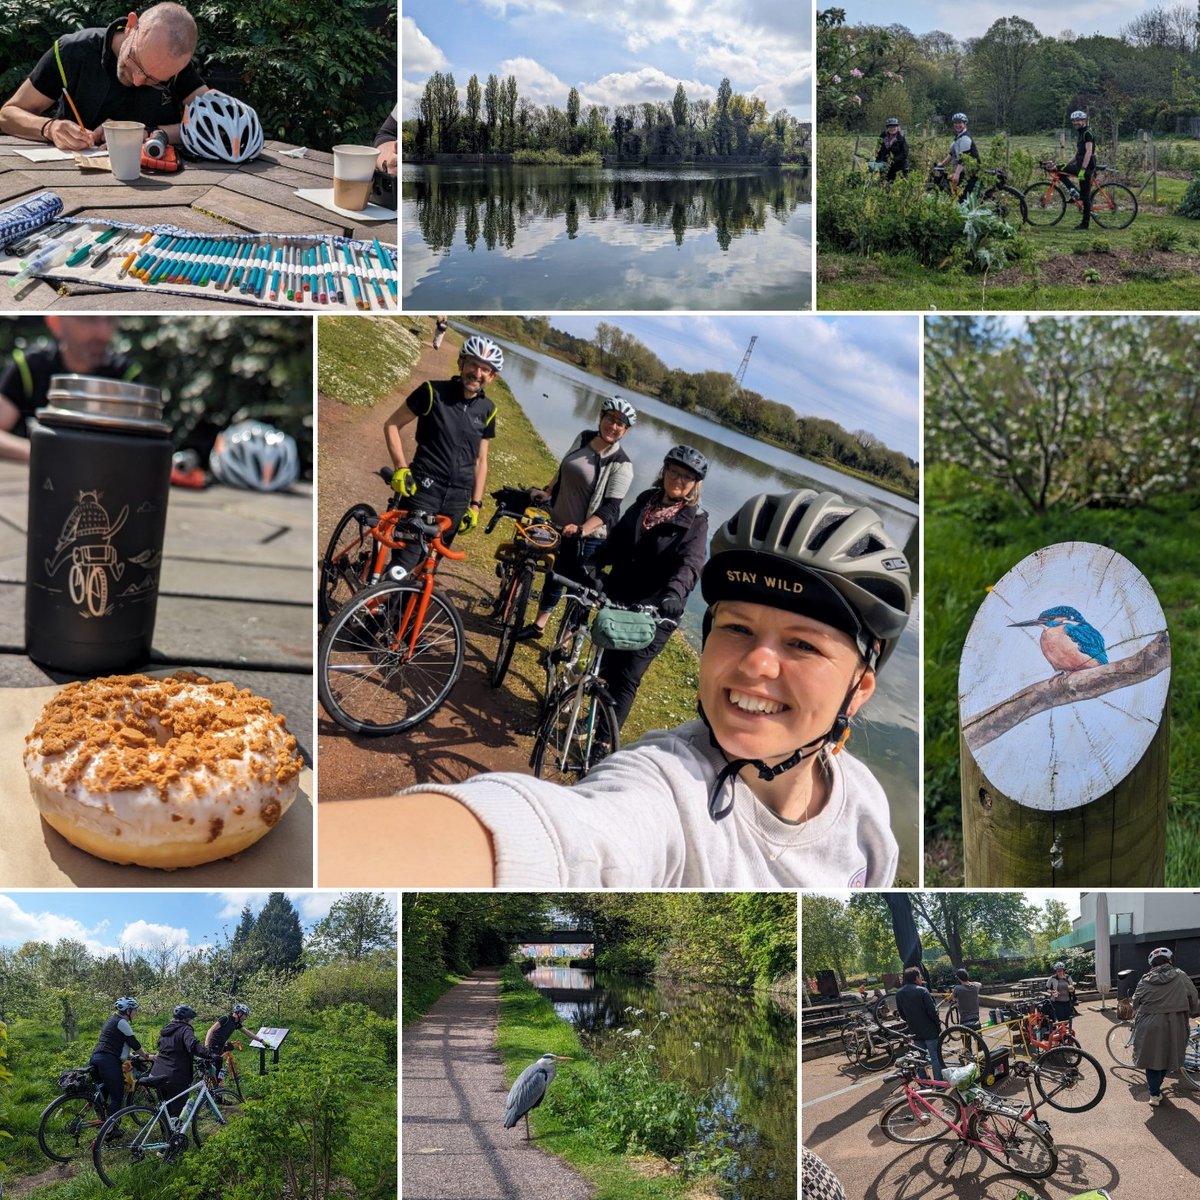 Exploring outdoor spaces, bike friendly routes & taking time to pause, connecting in nature🚲🙂💚 We have rides every Tuesday & some Saturdays + Dr Bike & Route Planning Sessions @mac_birmingham through May & June. Find out more & book your spot here: ecobirmingham.com/product-catego…